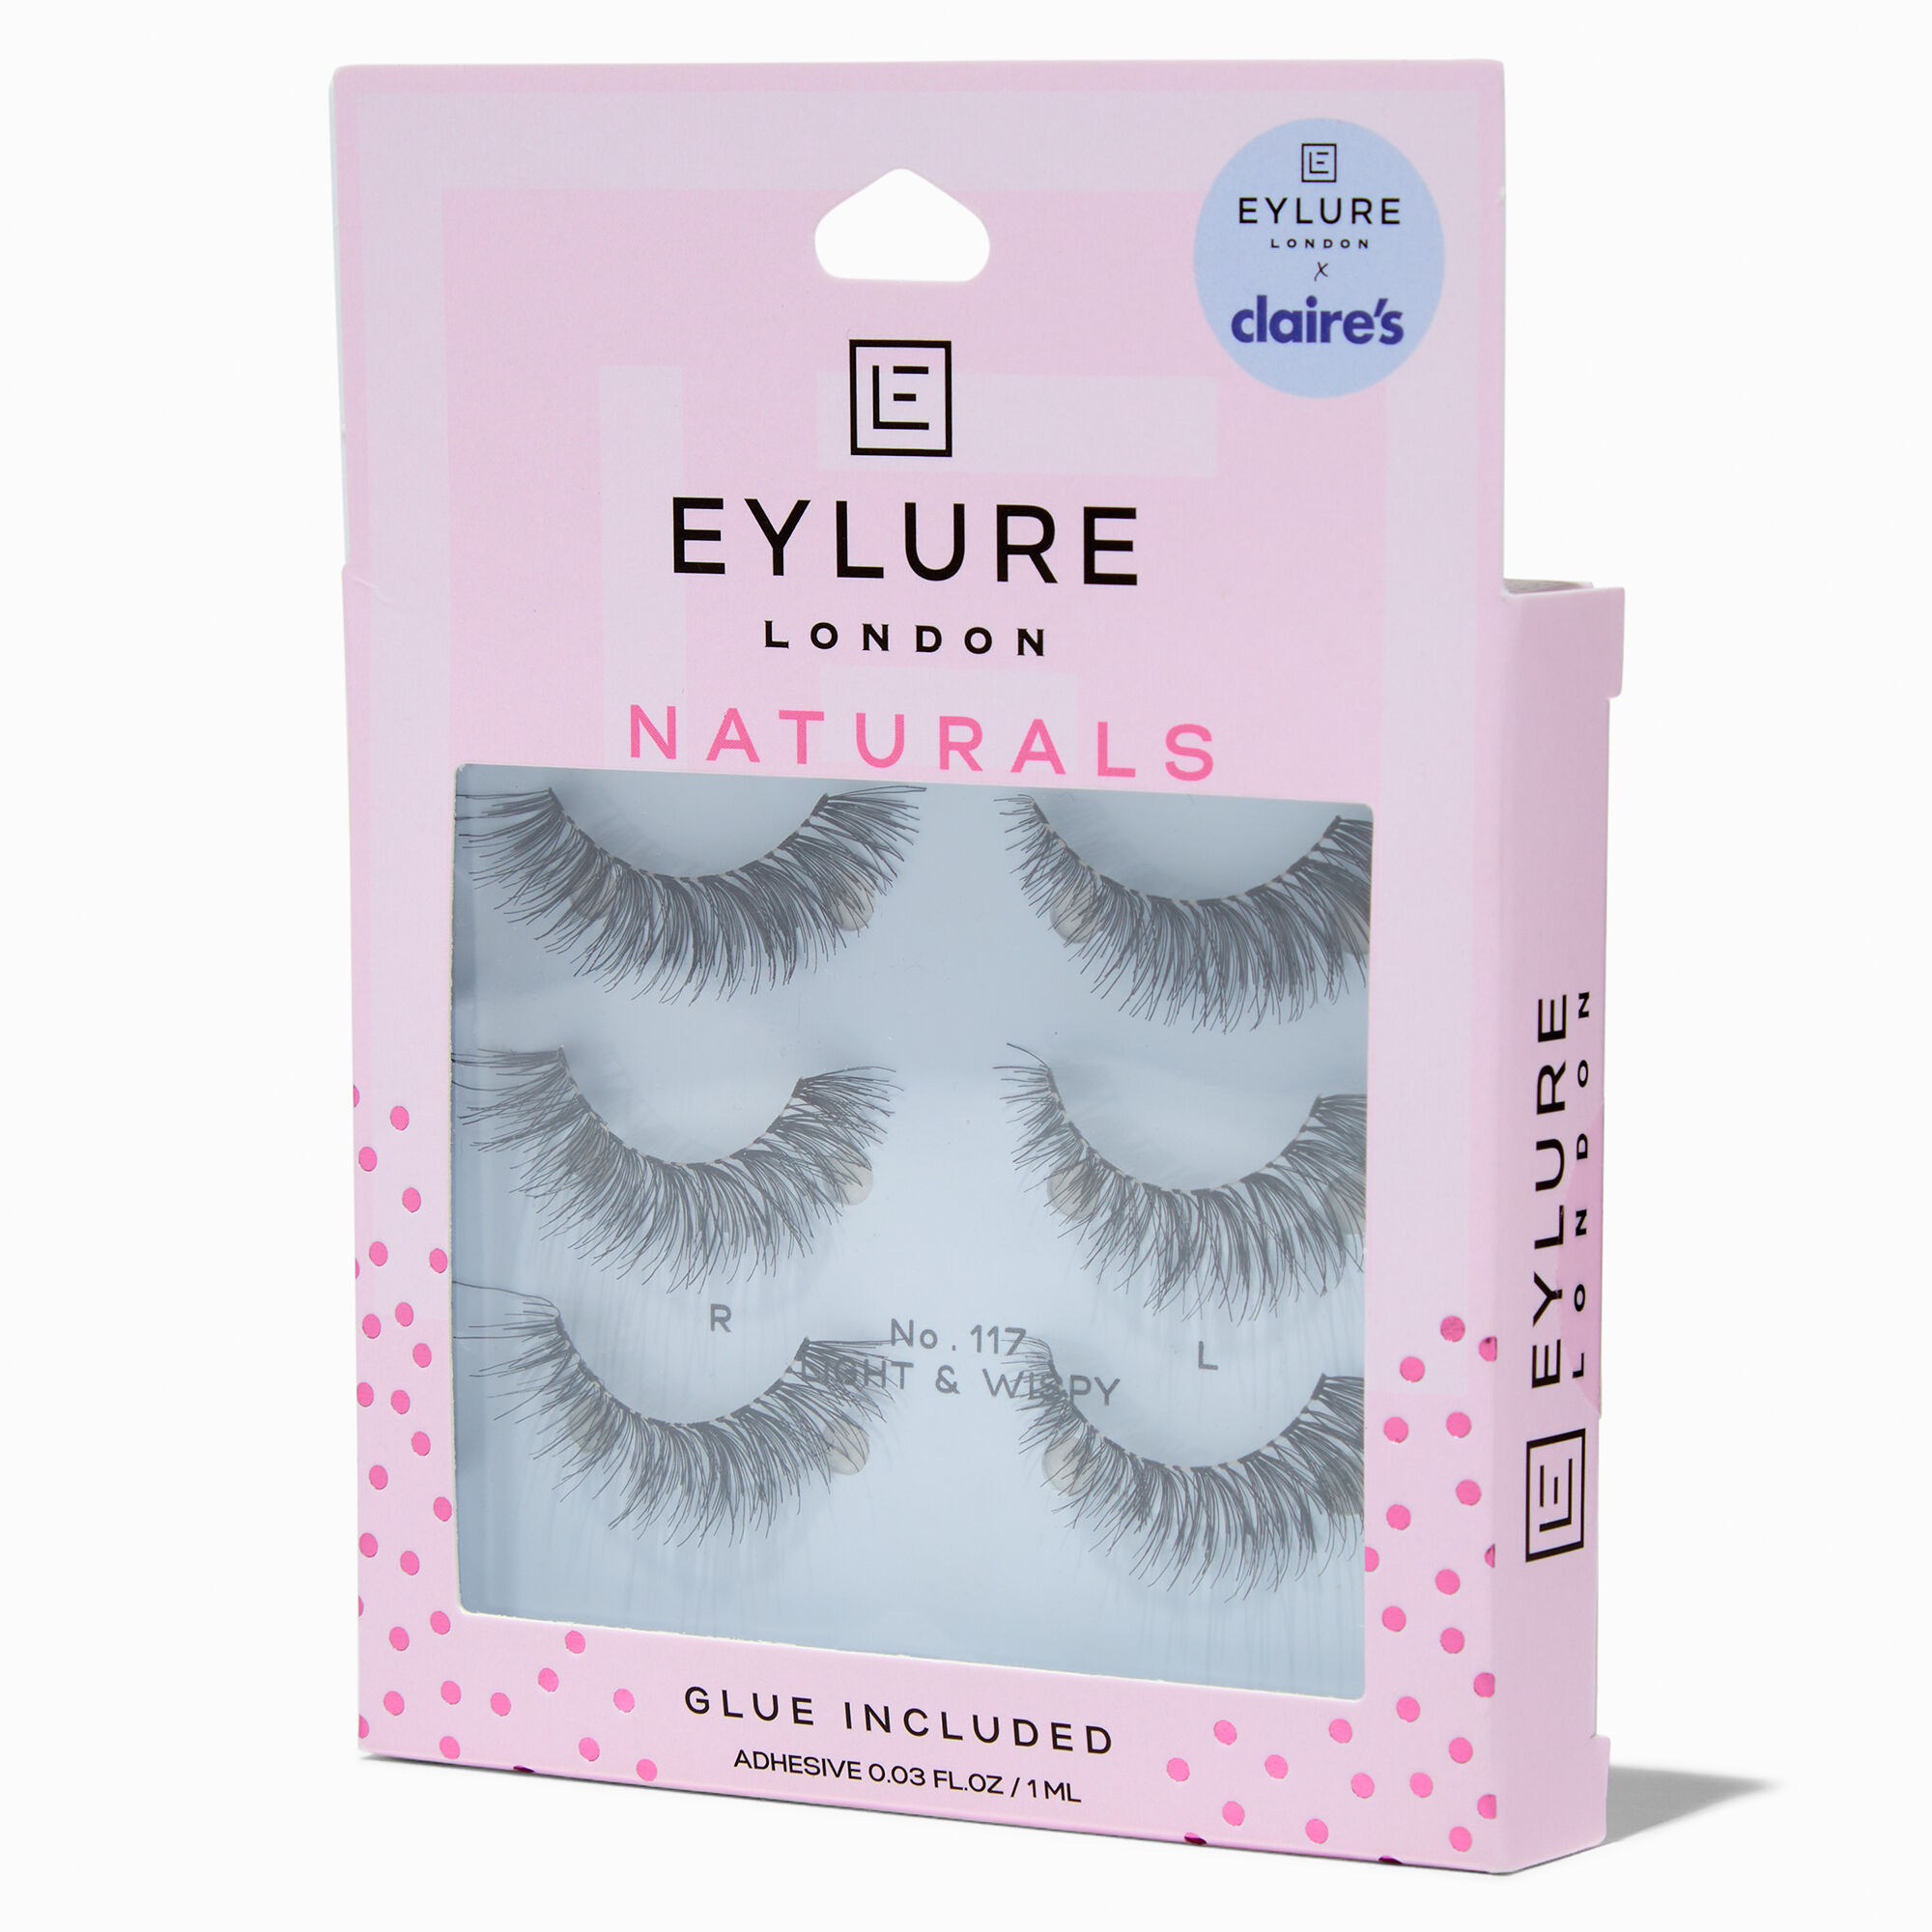 View Eylure Naturals Claires Exclusive No117 False Lashes 3 Pack information